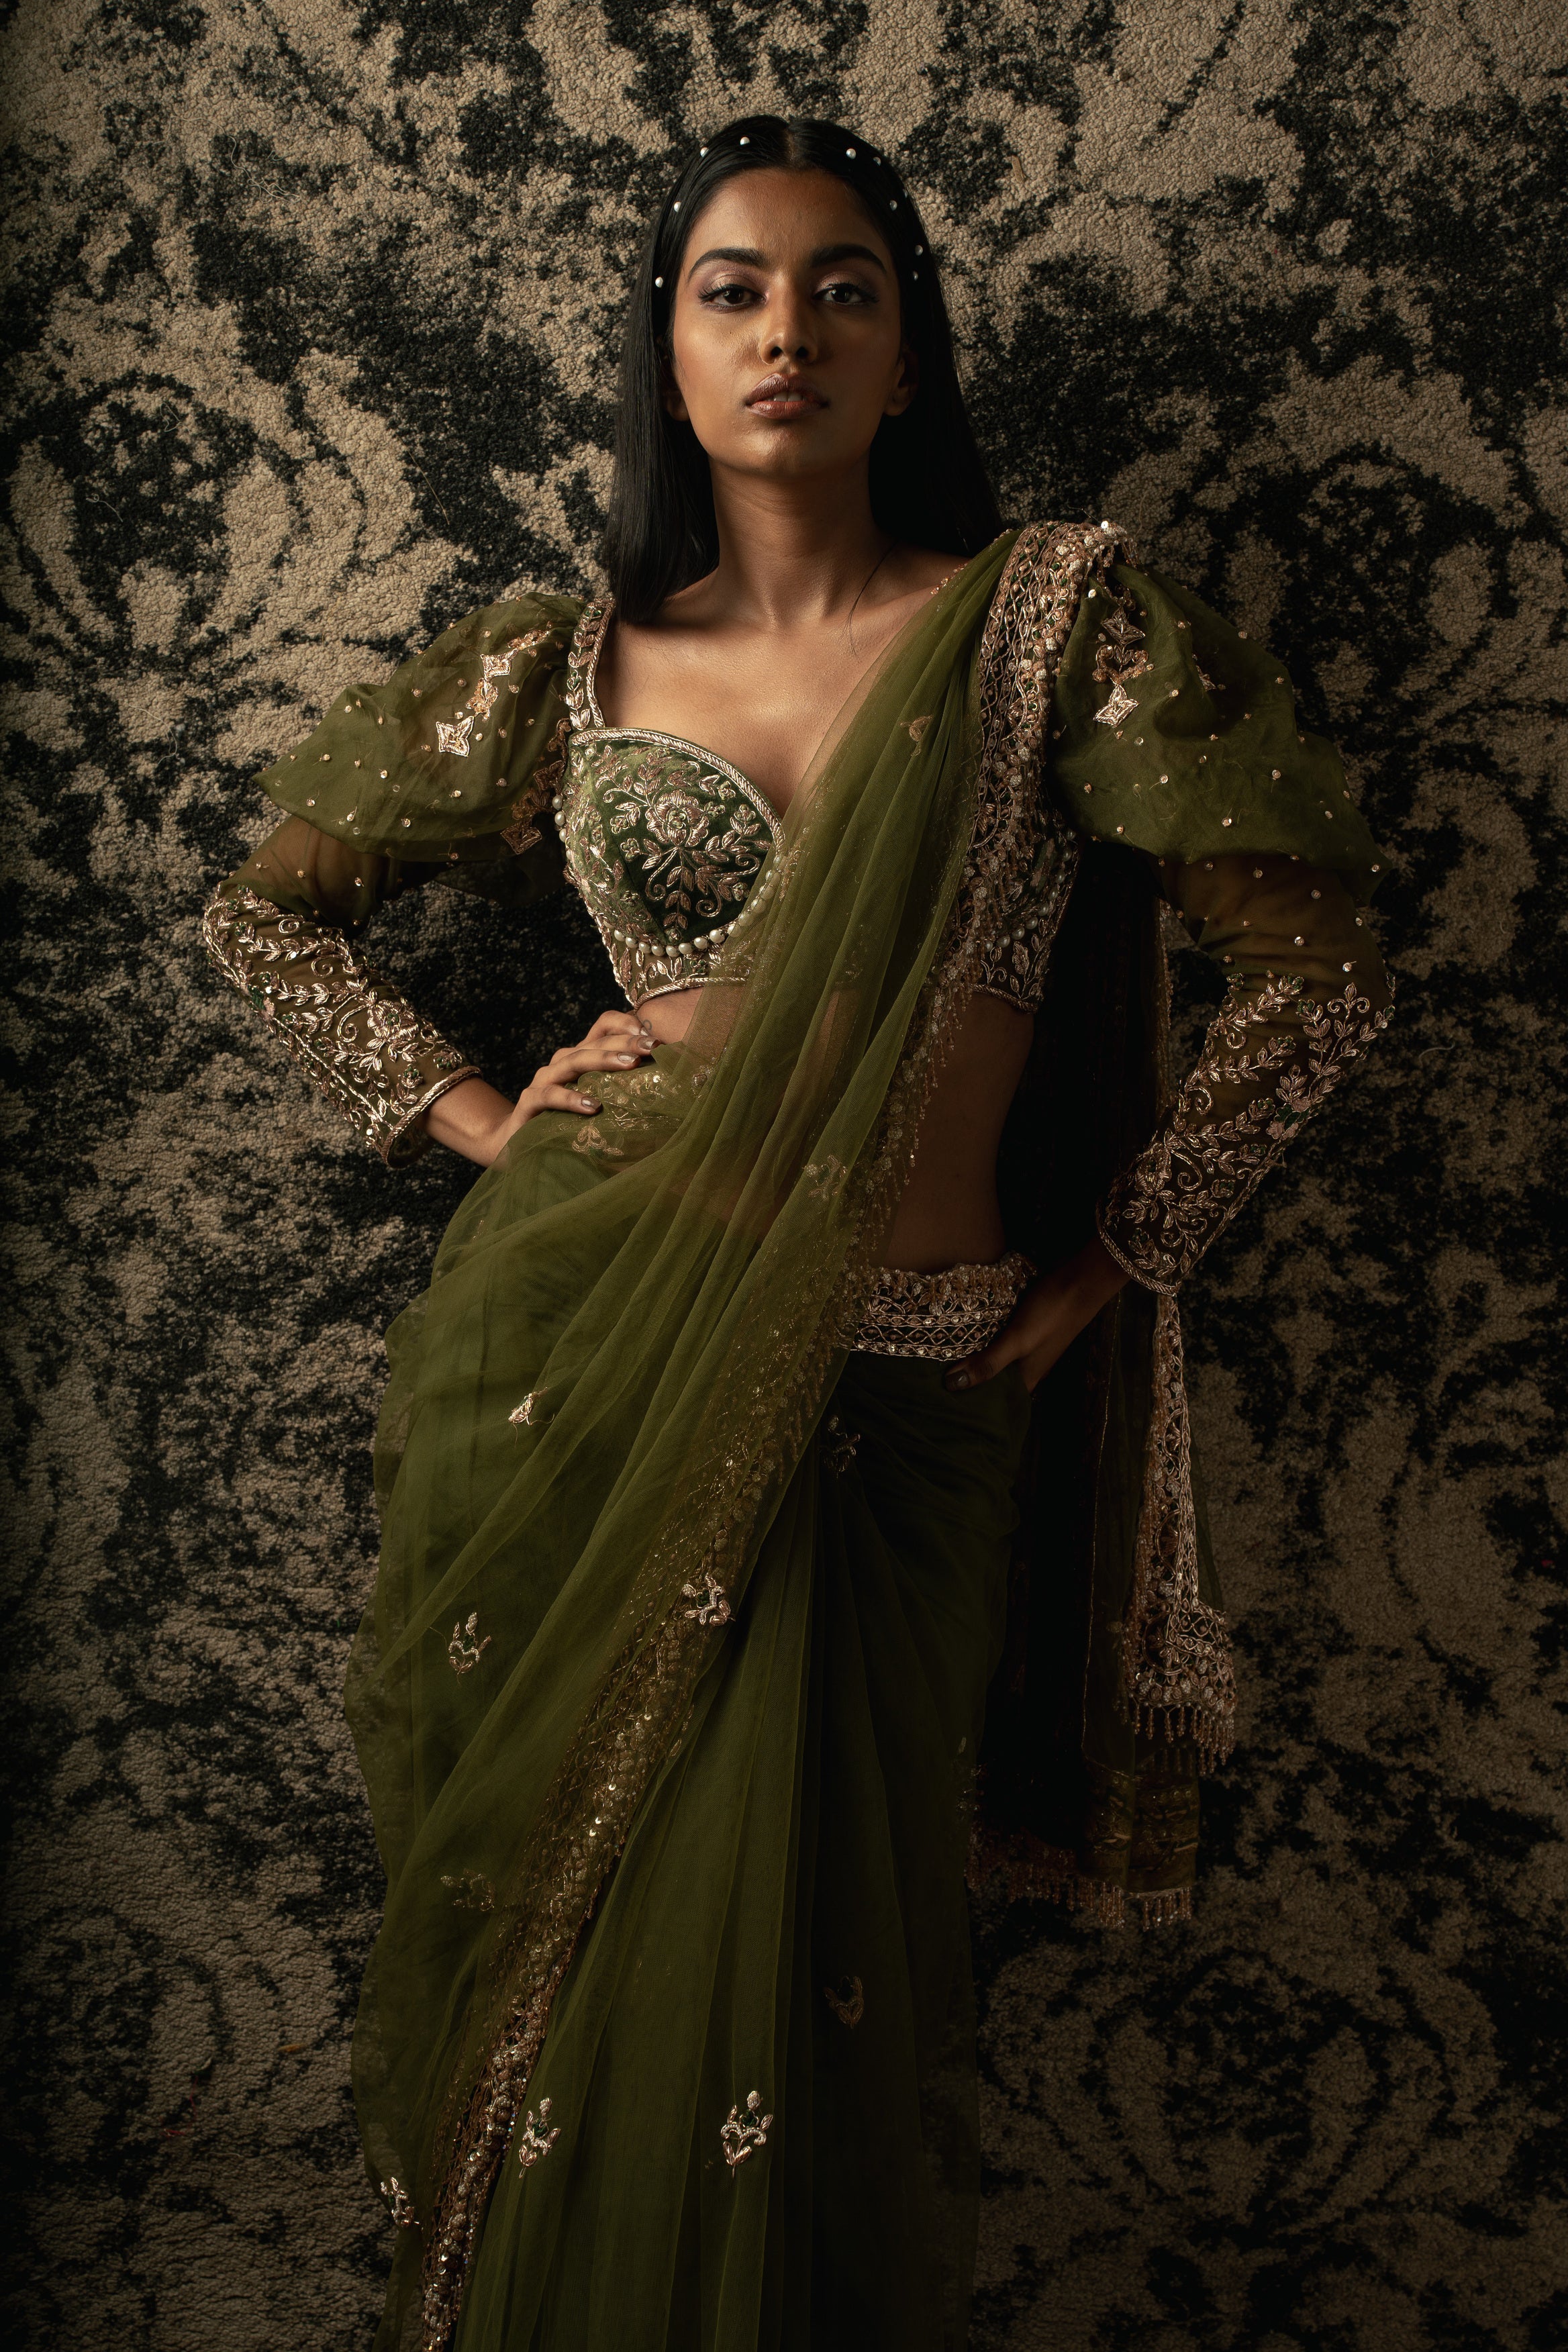 Wrap yourself in sophistication: Olive Green Net Saree paired with a Velvet and Organza blouse, a graceful ode to classic beauty.